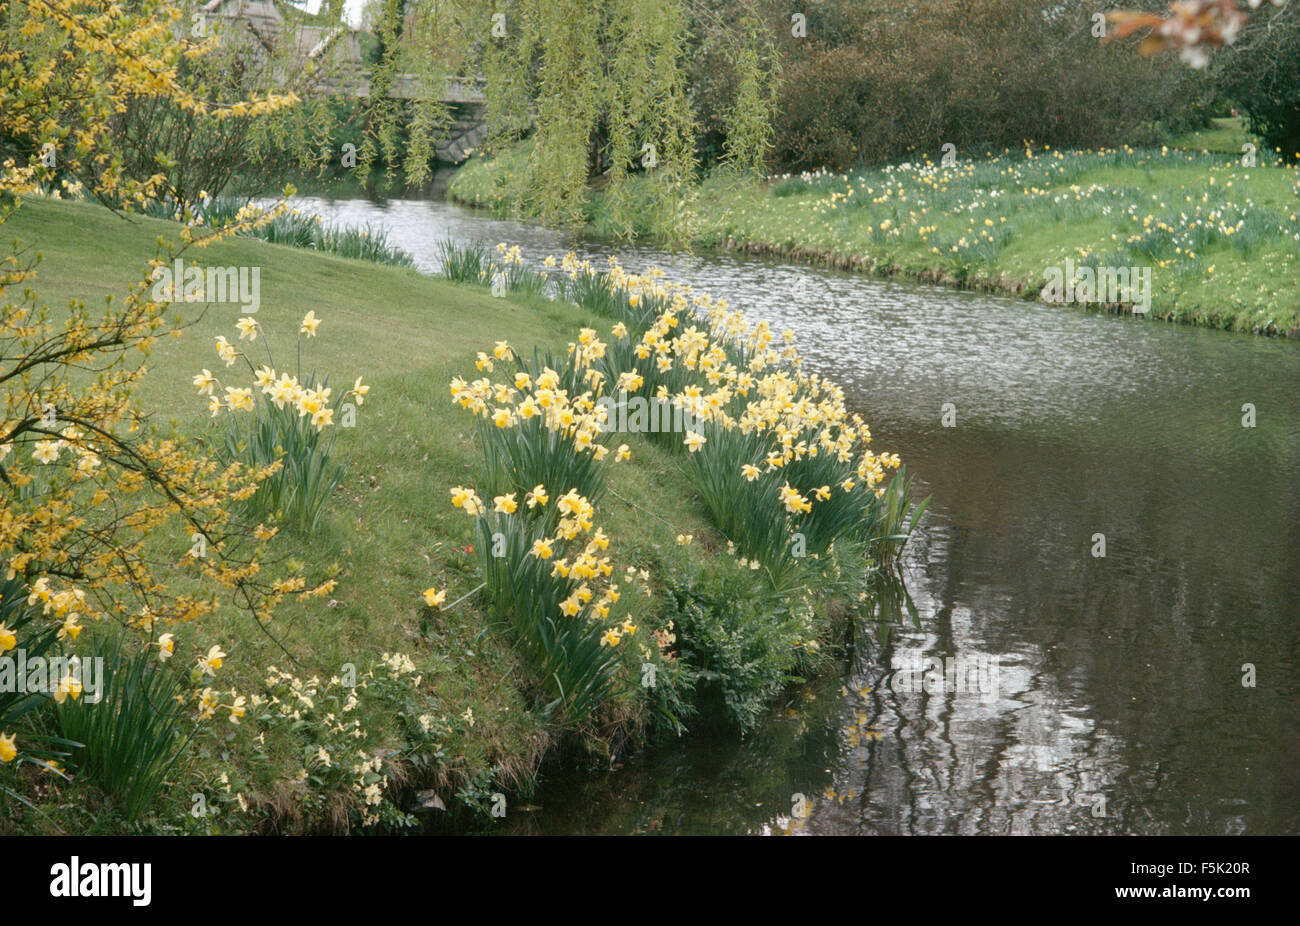 Daffodils growing on bank of river running through large country garden in Spring Stock Photo